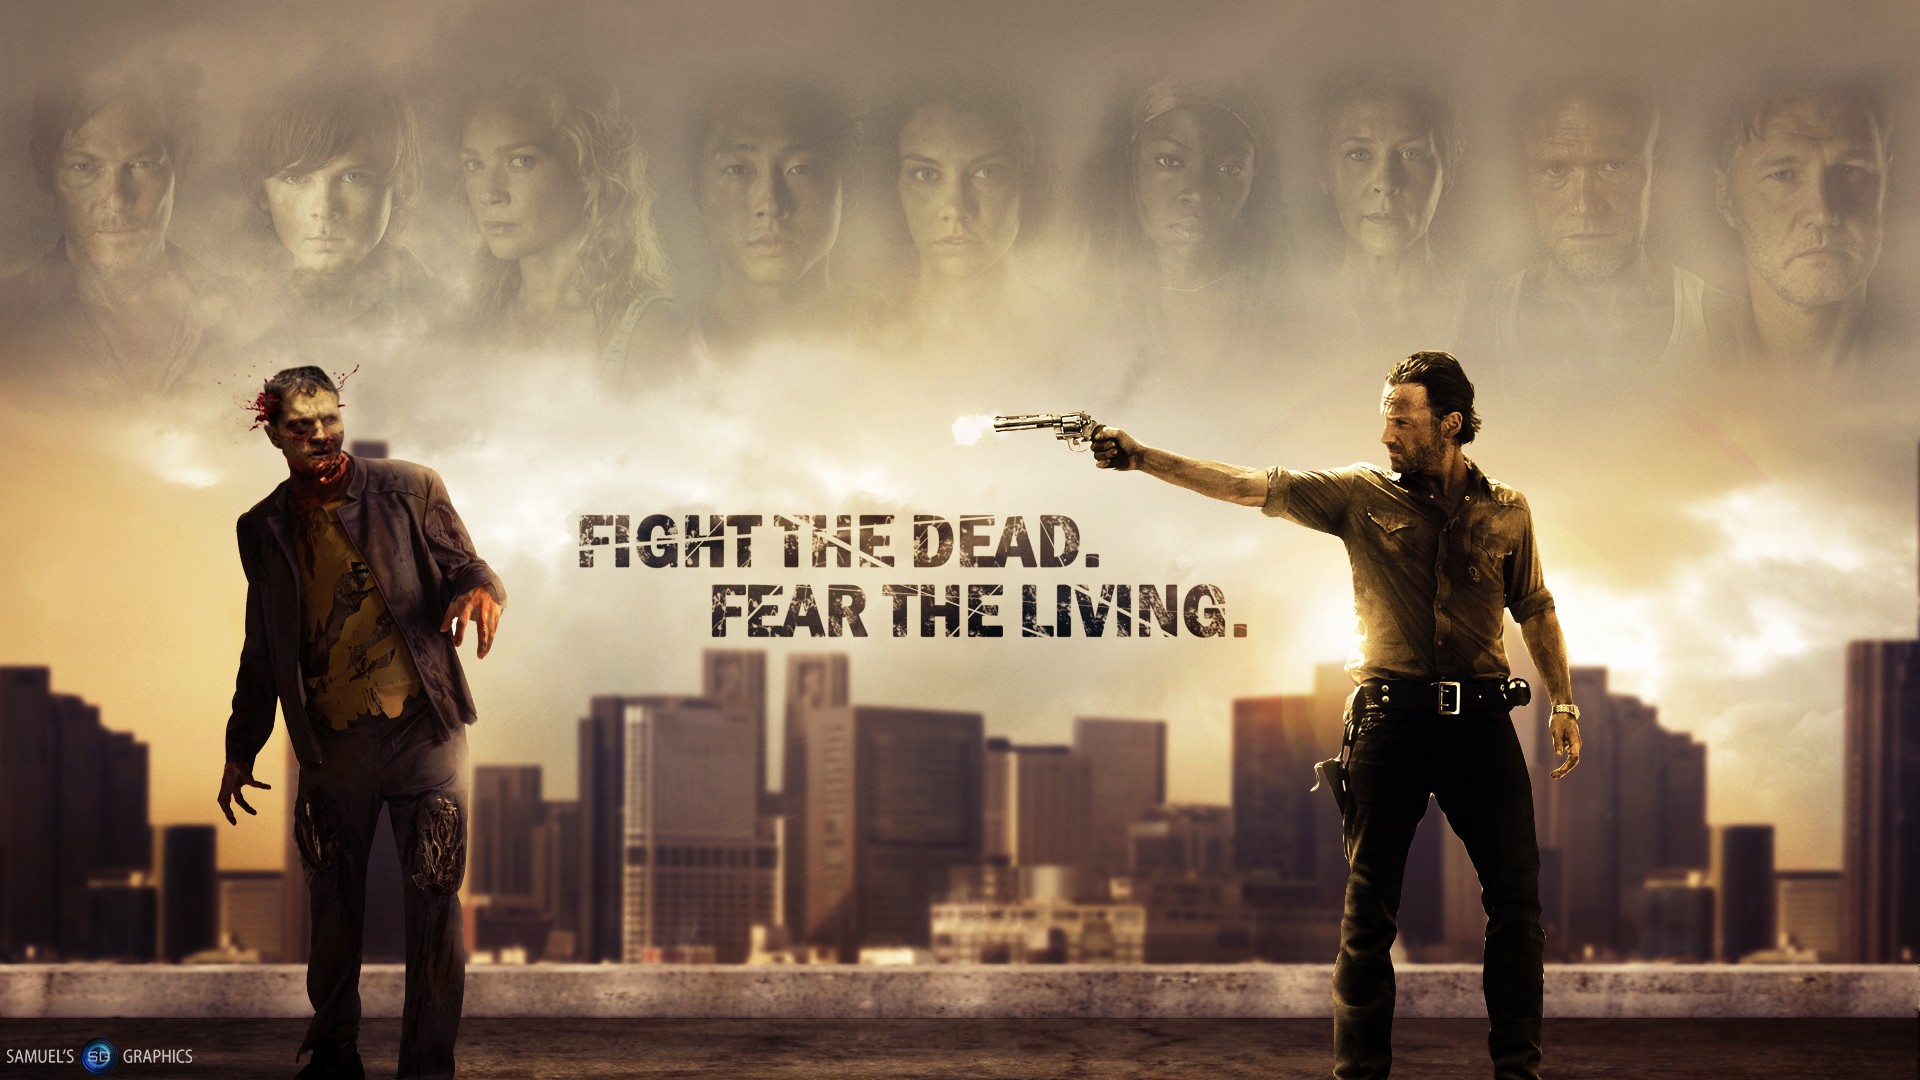 Walking Dead background ·① Download free cool HD backgrounds for